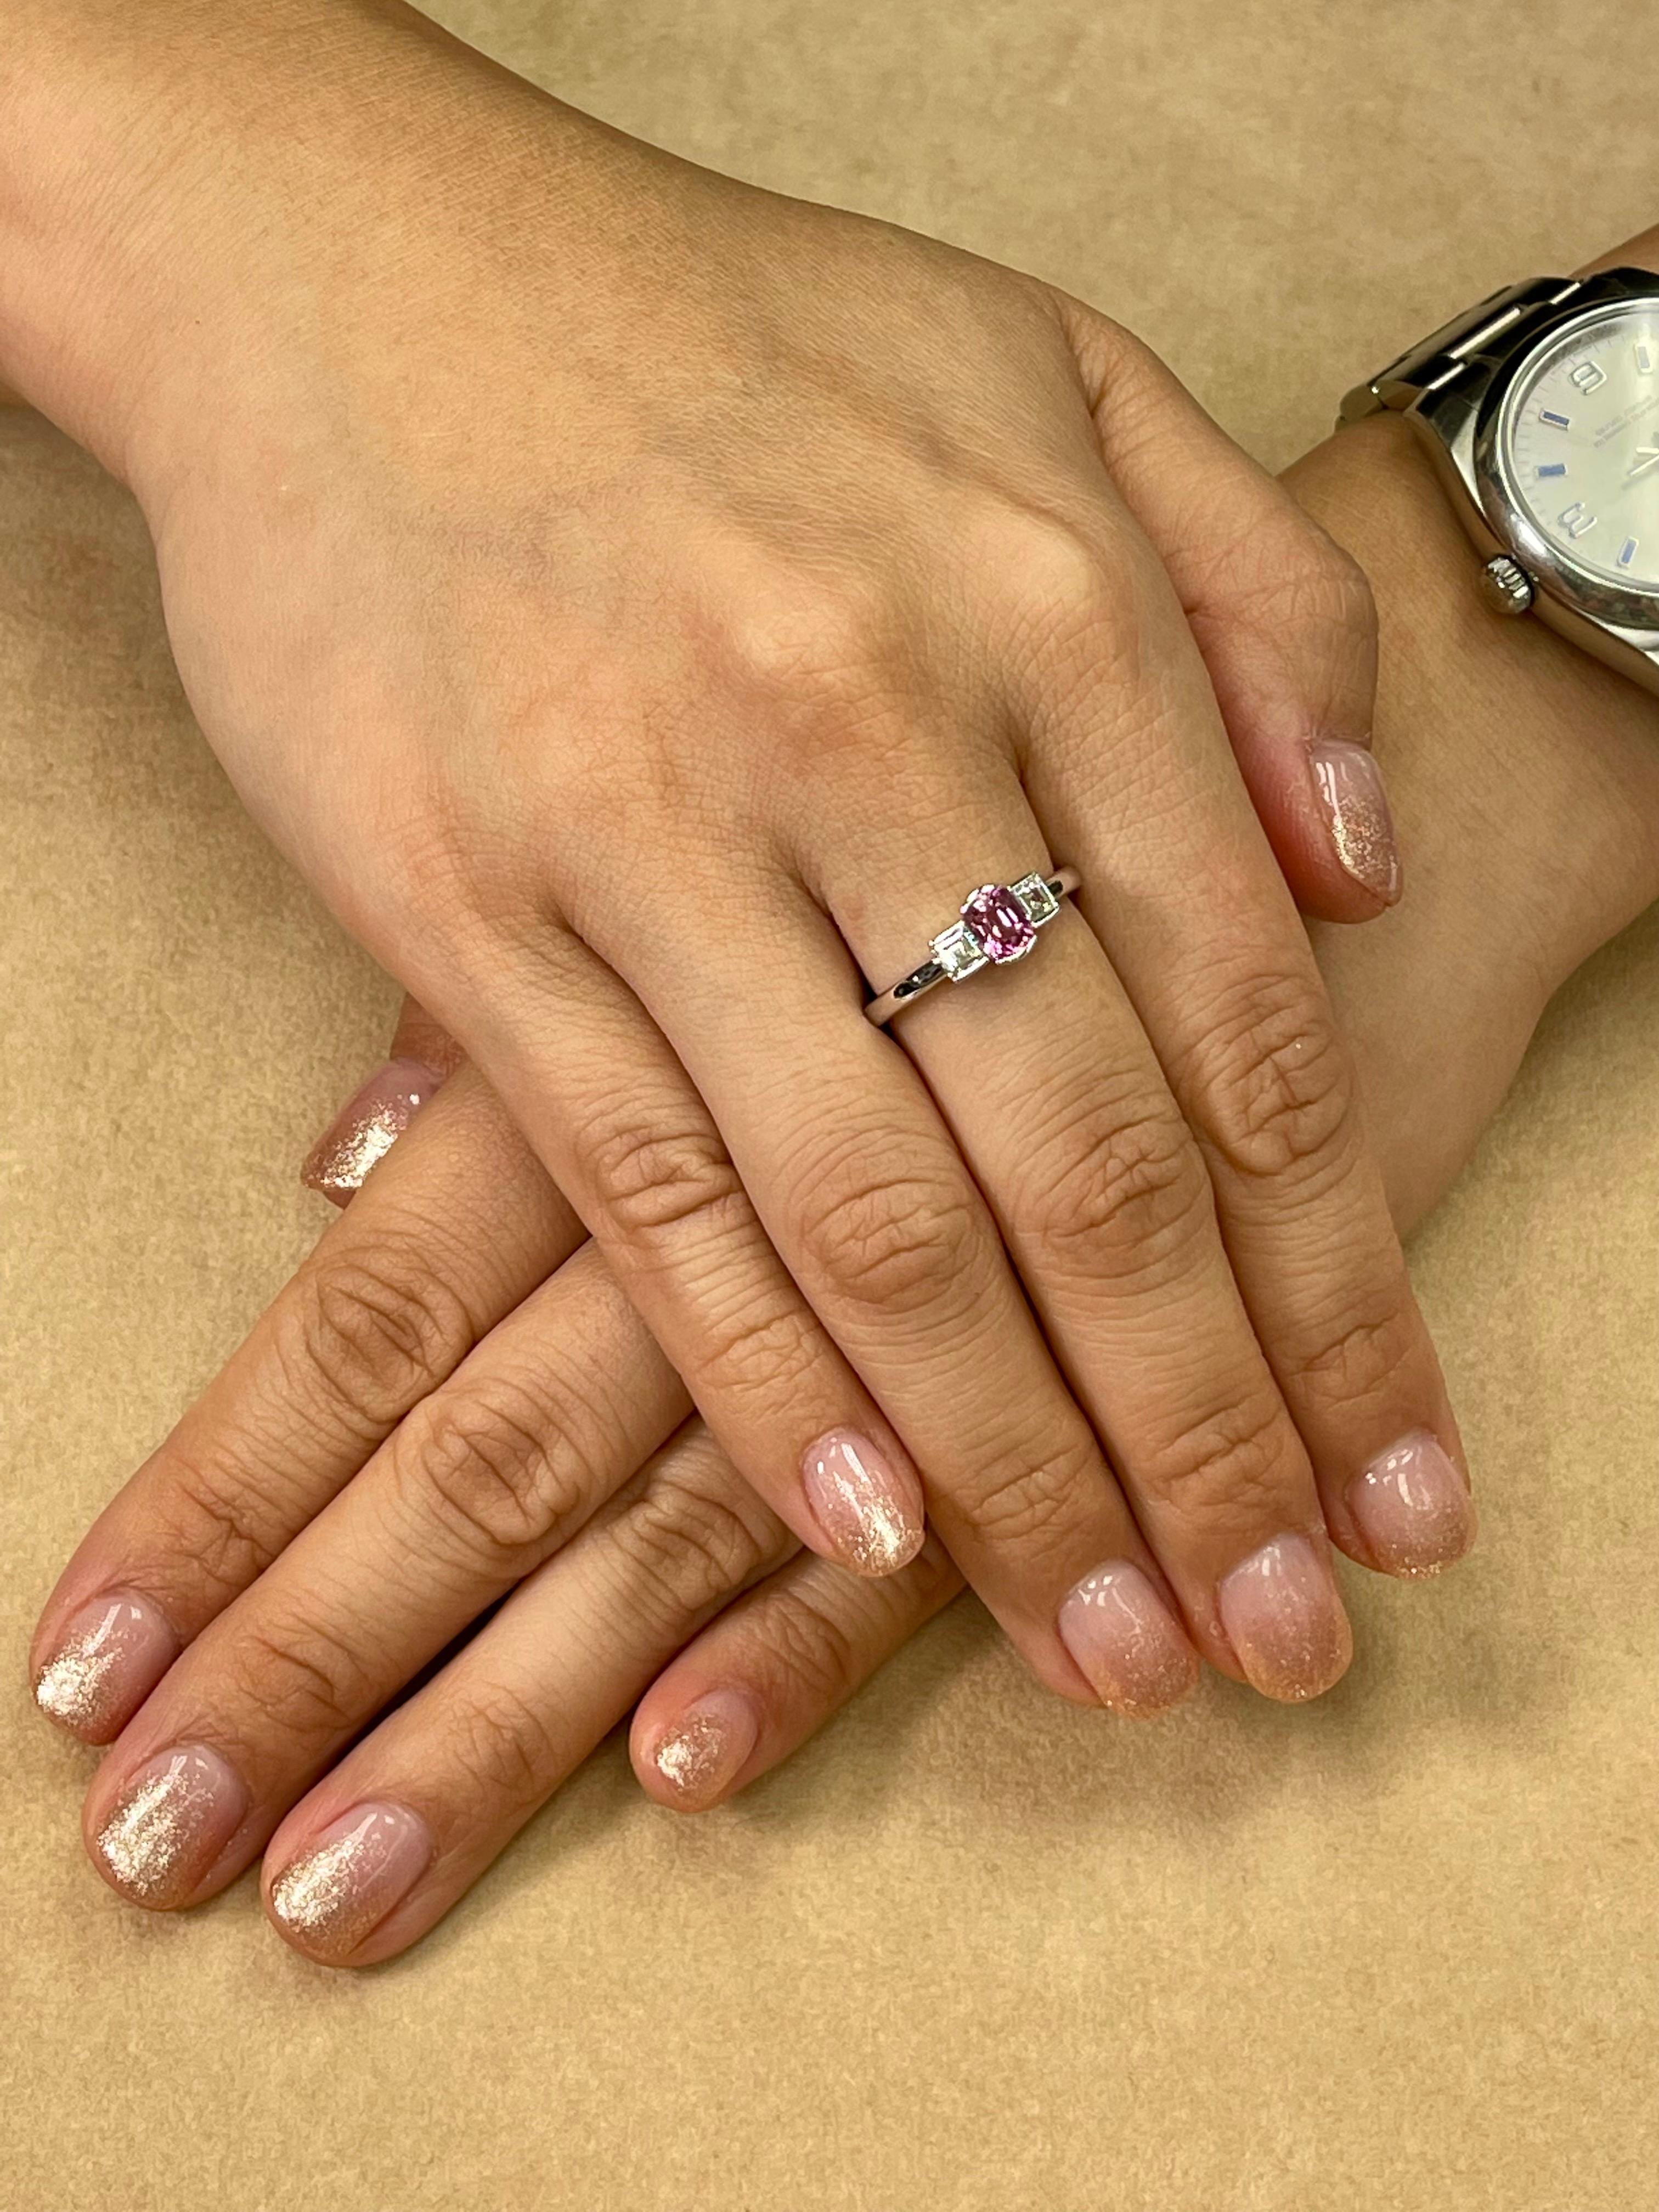 Please check out the HD video. Here is a bubble gum pink Spinel and diamond 3 stone ring. The ring is set in 18k white gold, spinel and step cut diamonds. Out of 300 cts of spinels (last 2 photos) only the best 16 cts were chosen and used in this